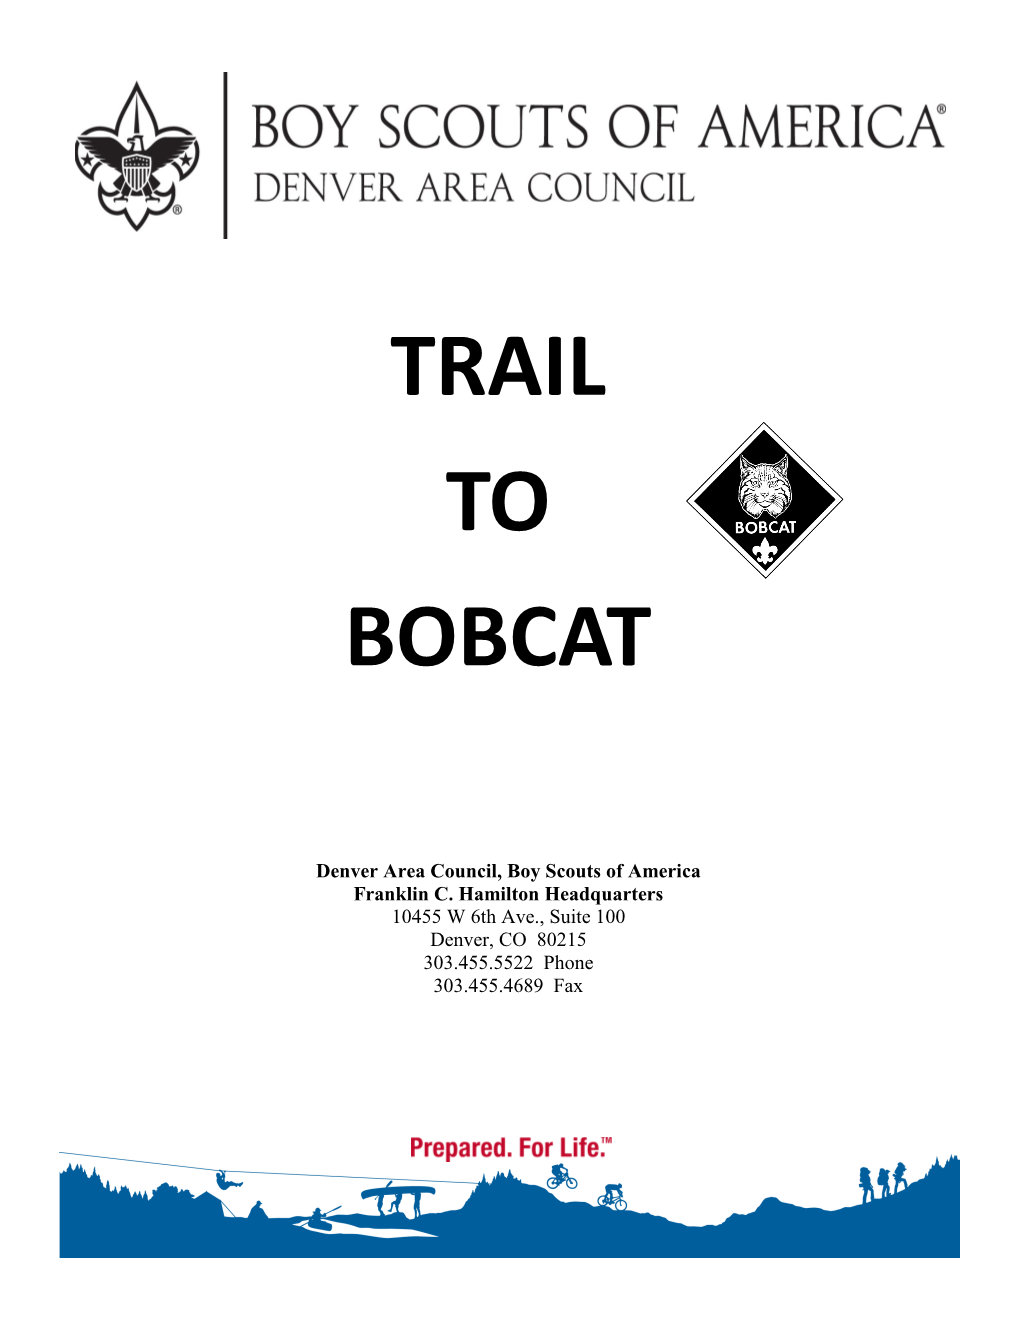 Trail to Bobcat